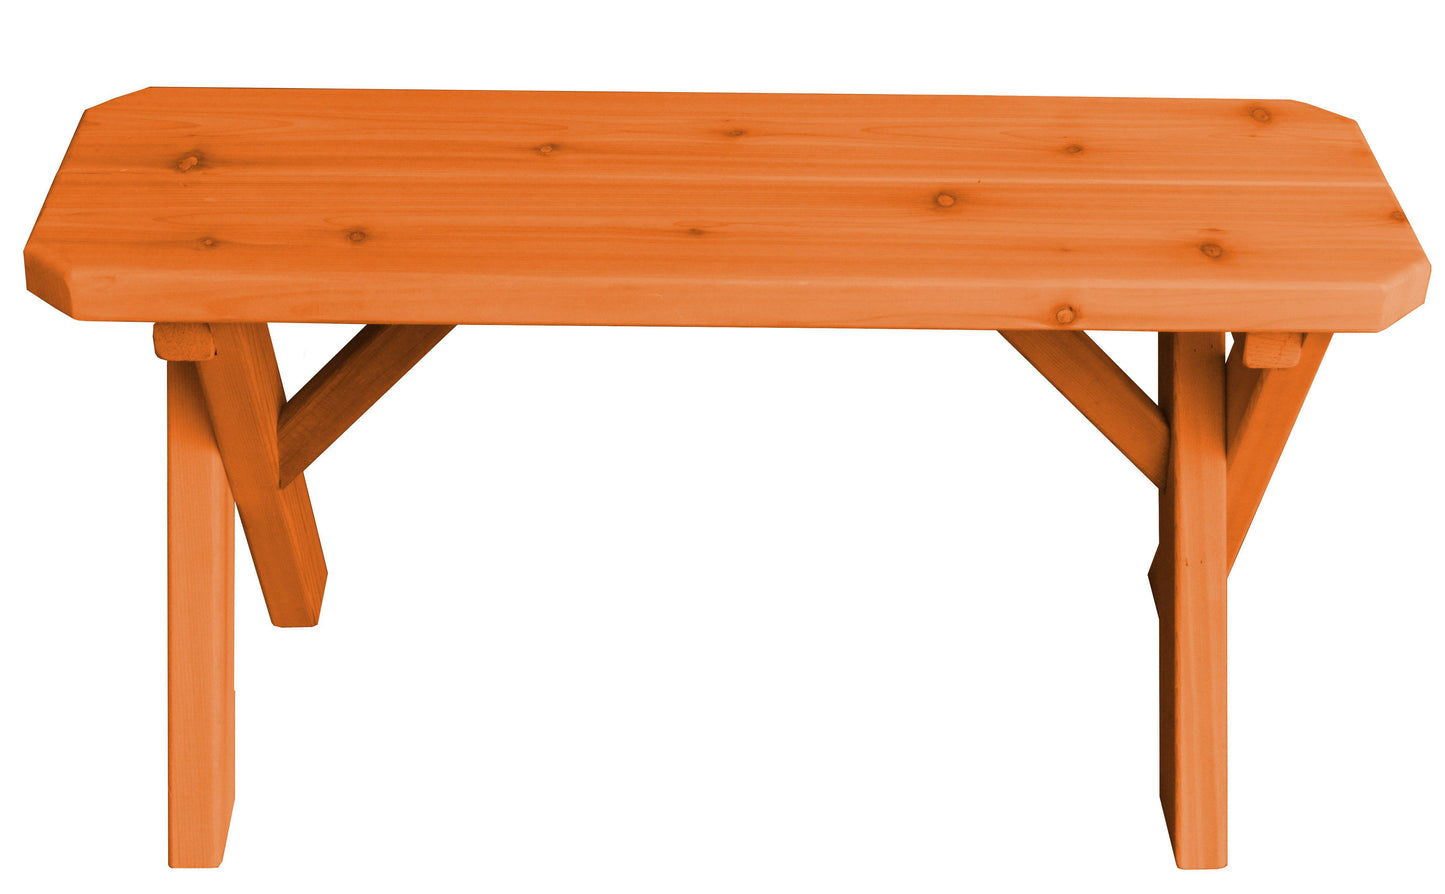 A&L FURNITURE CO. Western Red Cedar 44" Crossleg Bench Only - LEAD TIME TO SHIP 4 WEEKS OR LESS